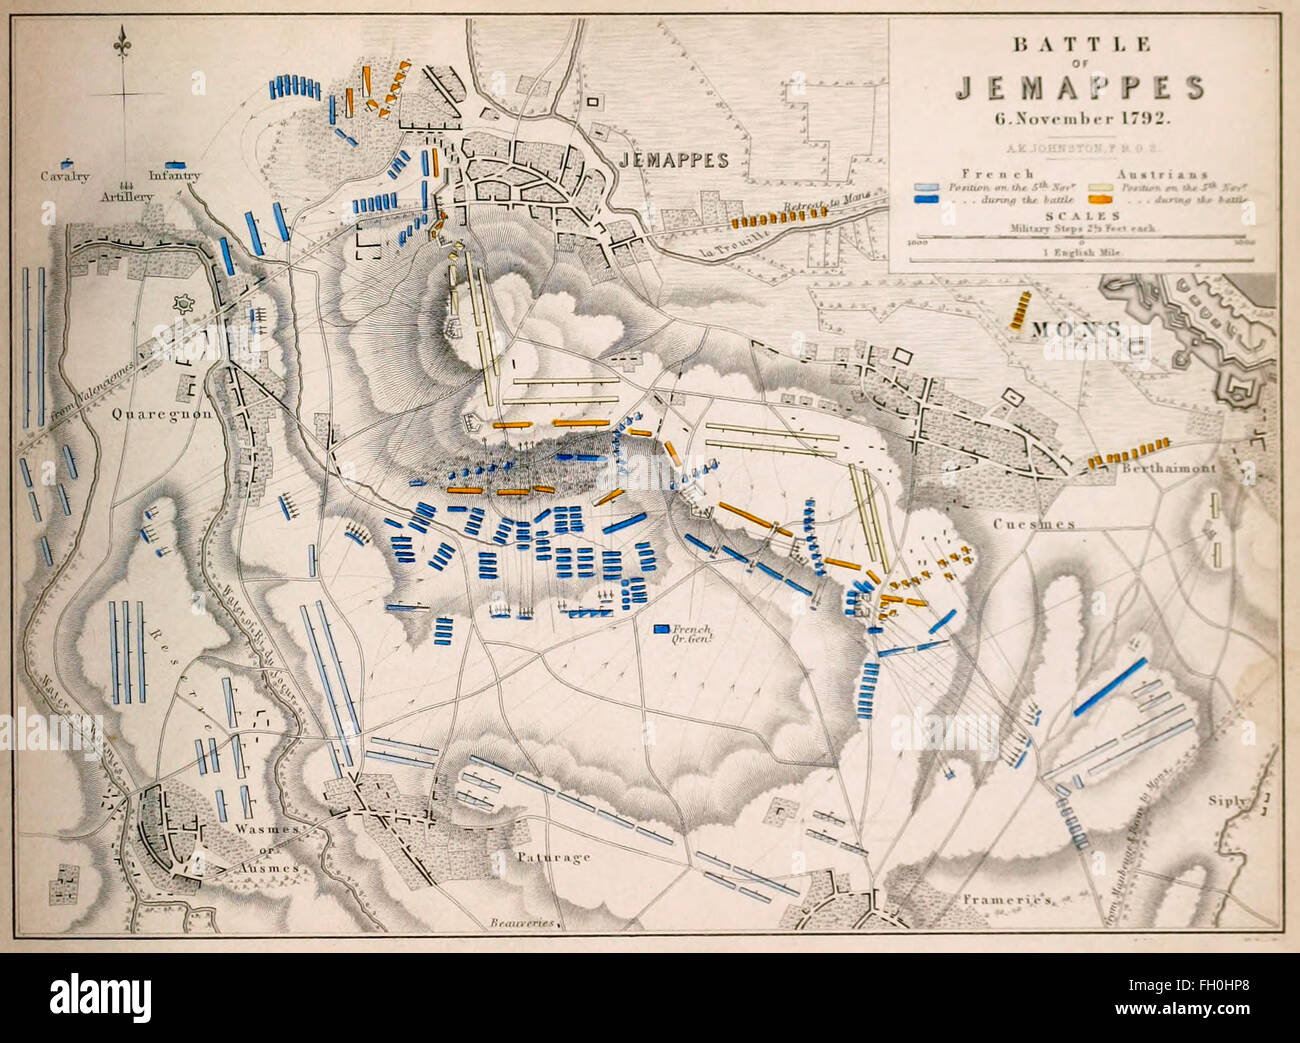 Map of The Battle of Jemappes (6 November 1792) took place near the town of Jemappes in Hainaut, Belgium, near Mons during the War of the First Coalition, part of the French Revolutionary Wars. Stock Photo